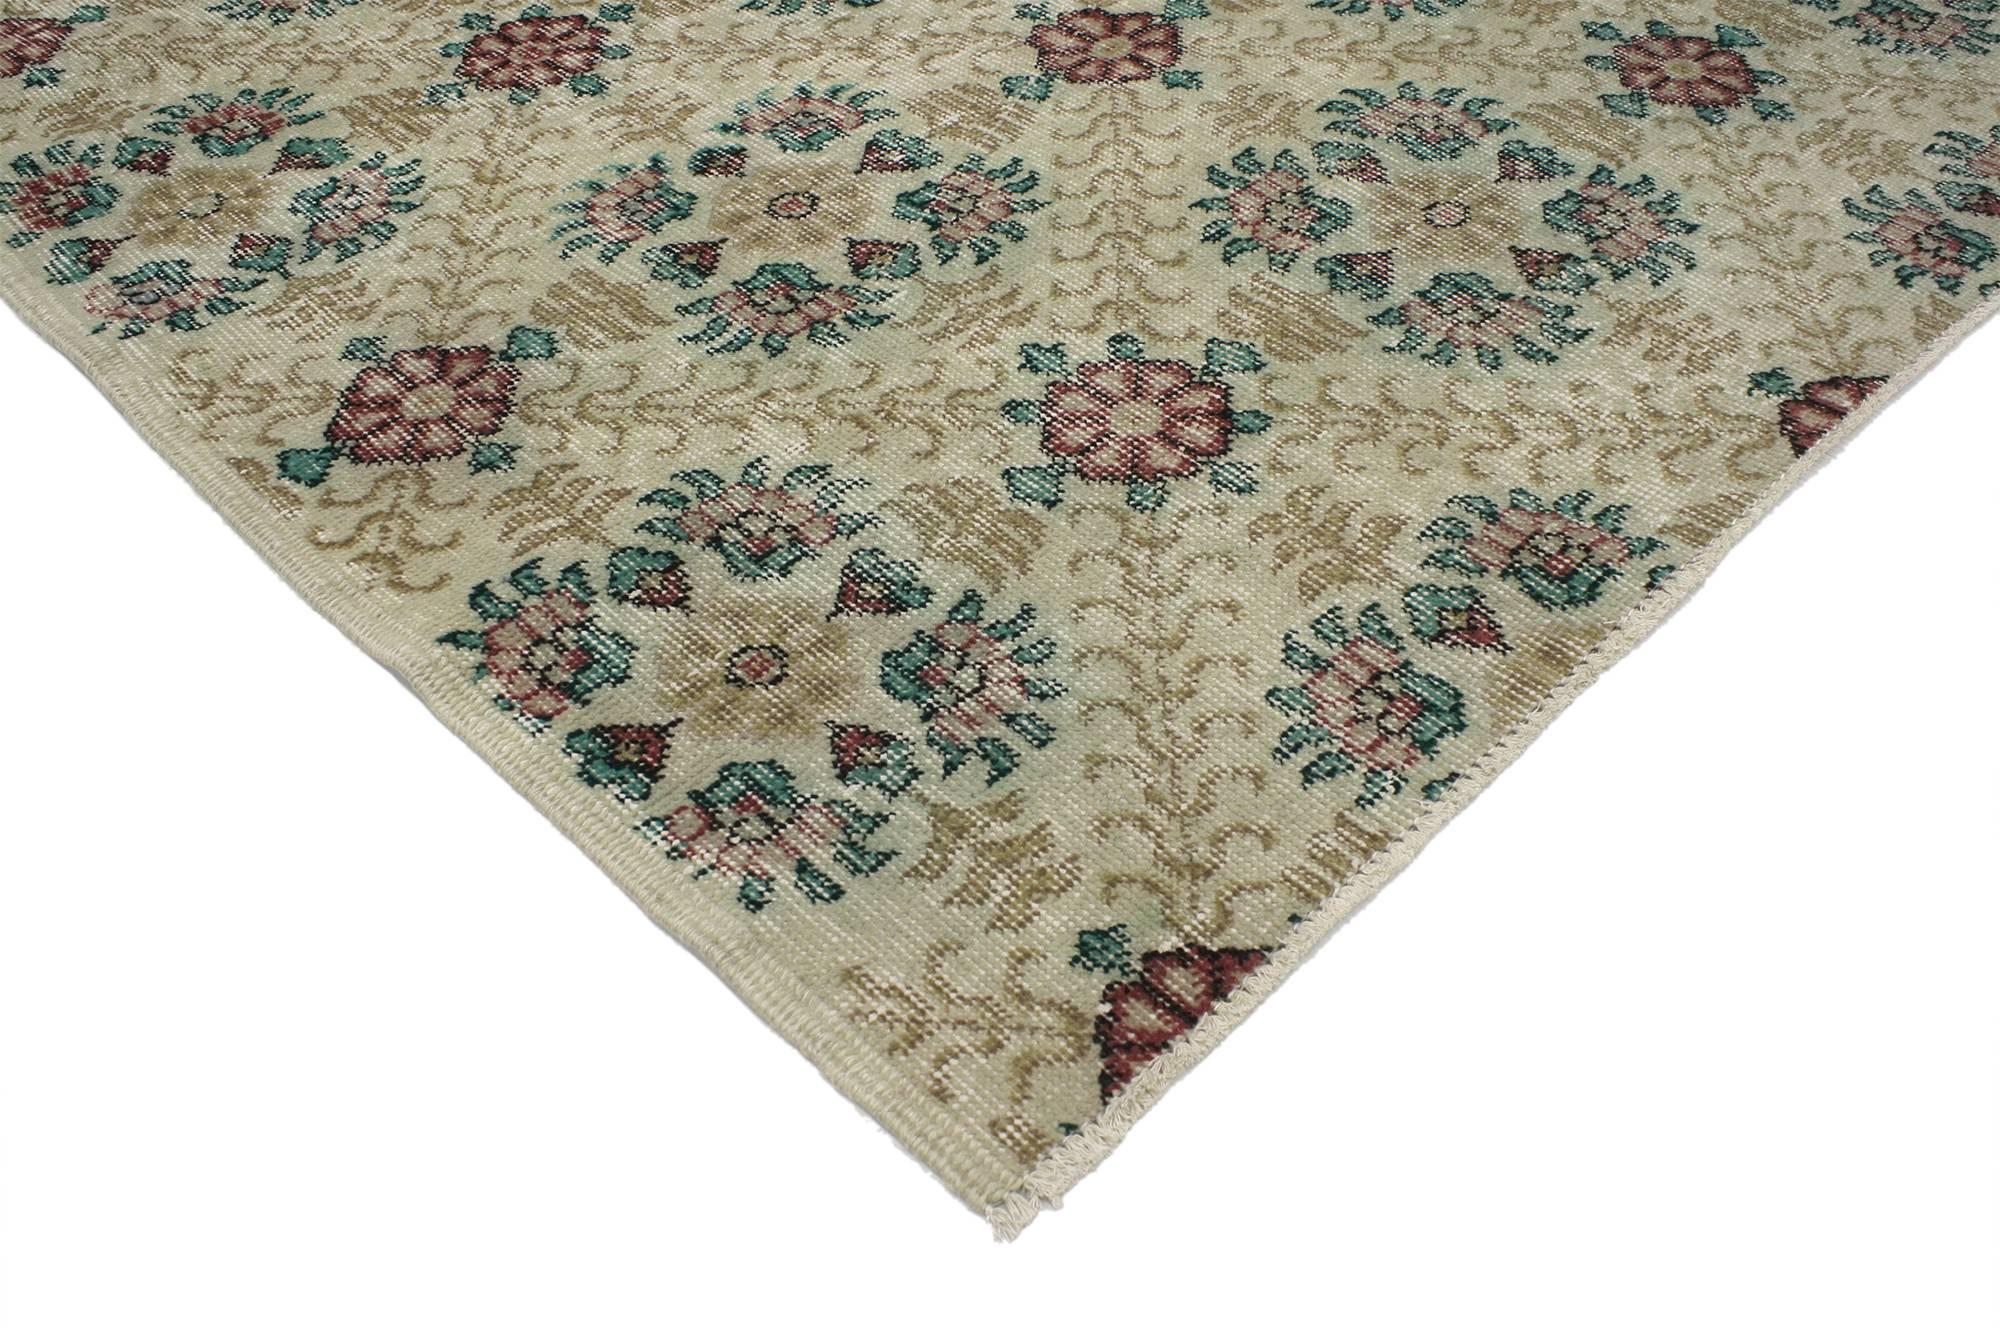 51969 Distressed Turkish Sivas Rug with Shabby Chic English Country Cottage Style. With the perfect mix of romance and simplicity, this hand-knotted wool distressed vintage Turkish Sivas rug embodies a cozy English Country Cottage style. The field